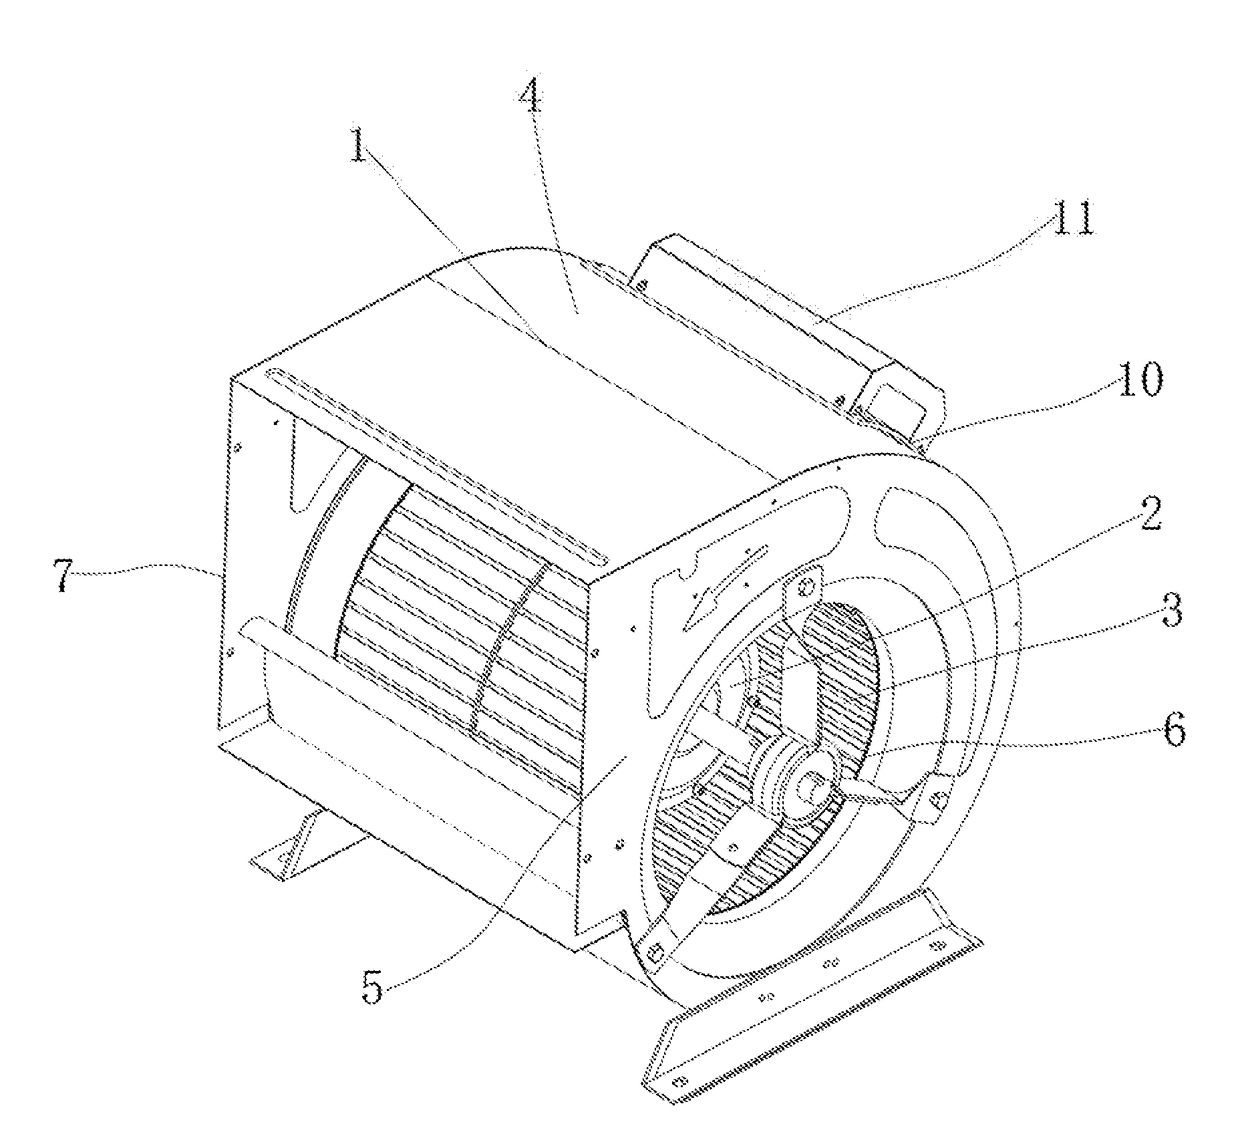 Novel volute centrifugal fan with permanent-magnet brush-less motor system